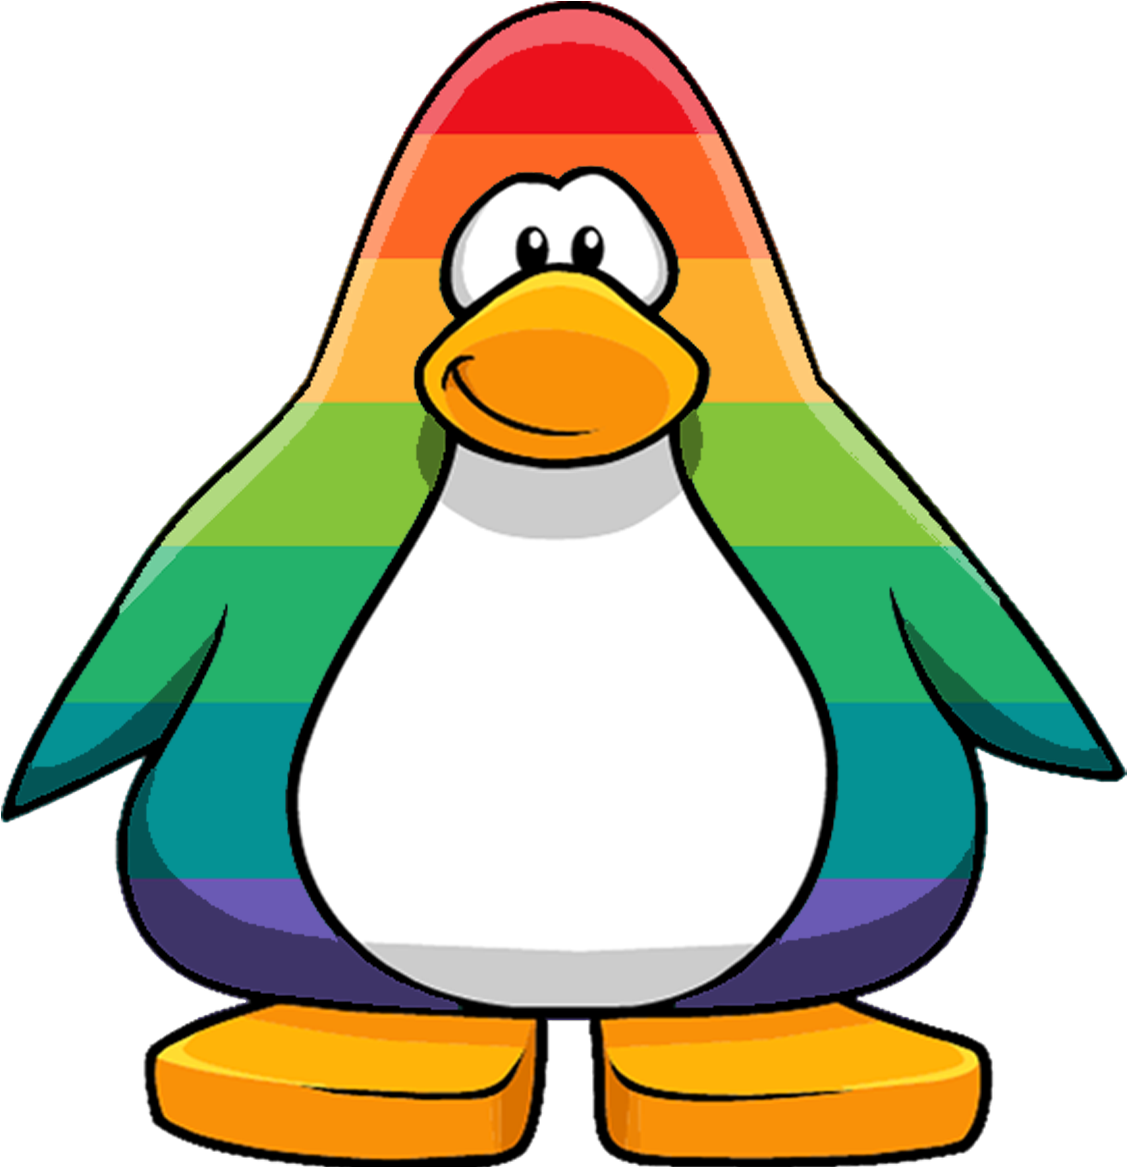 Club Penguin Extension - roblox ninja character roblox ninja coloring pages png image transparent png free download on seekpng